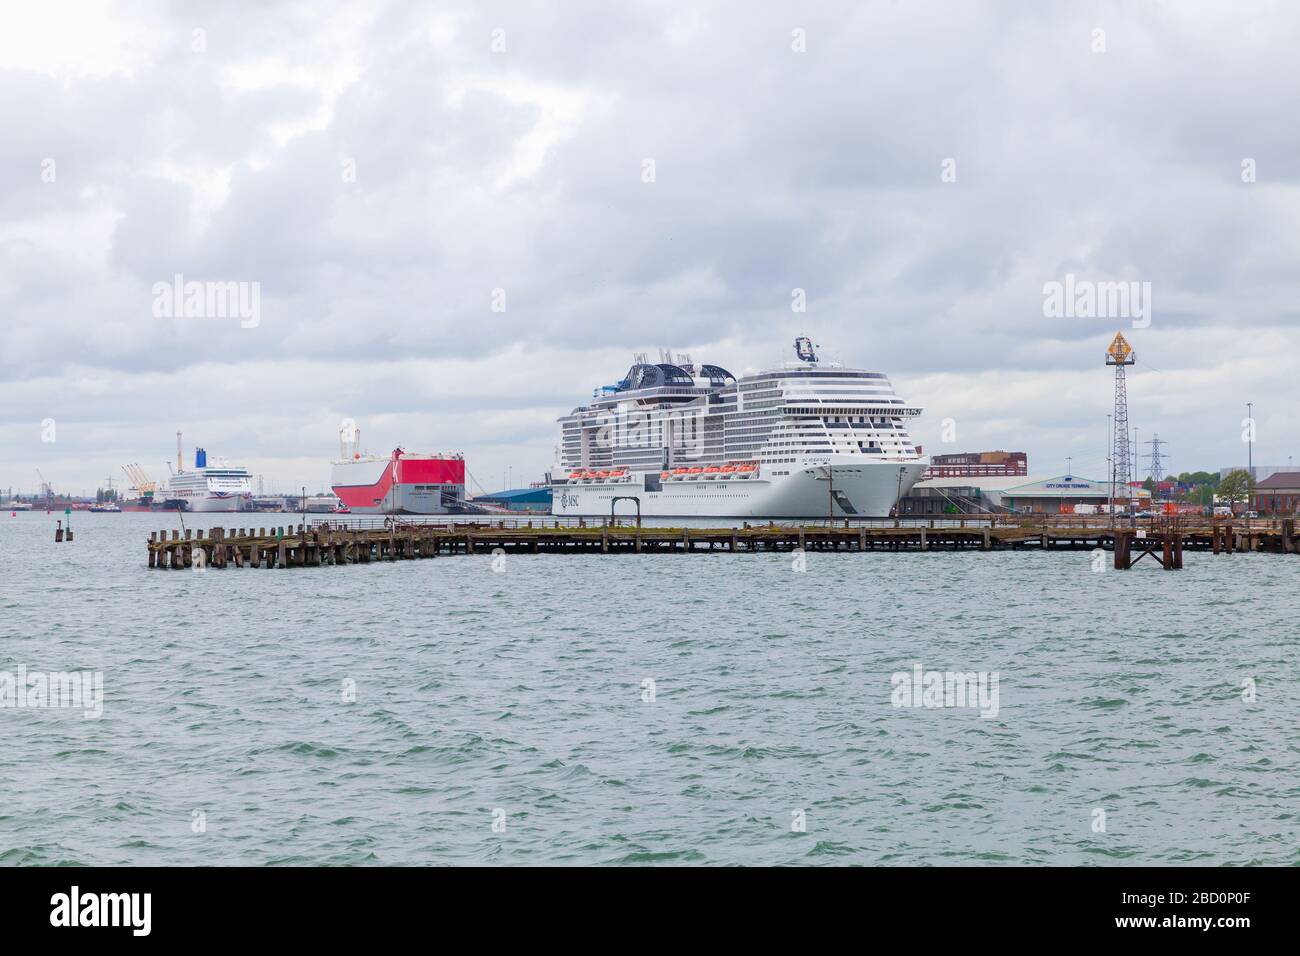 Southampton, United Kingdom - April 24, 2019: Passenger cruise ship MSC Meraviglia is moored in the port of Southampton. This cruise ship owned and op Stock Photo